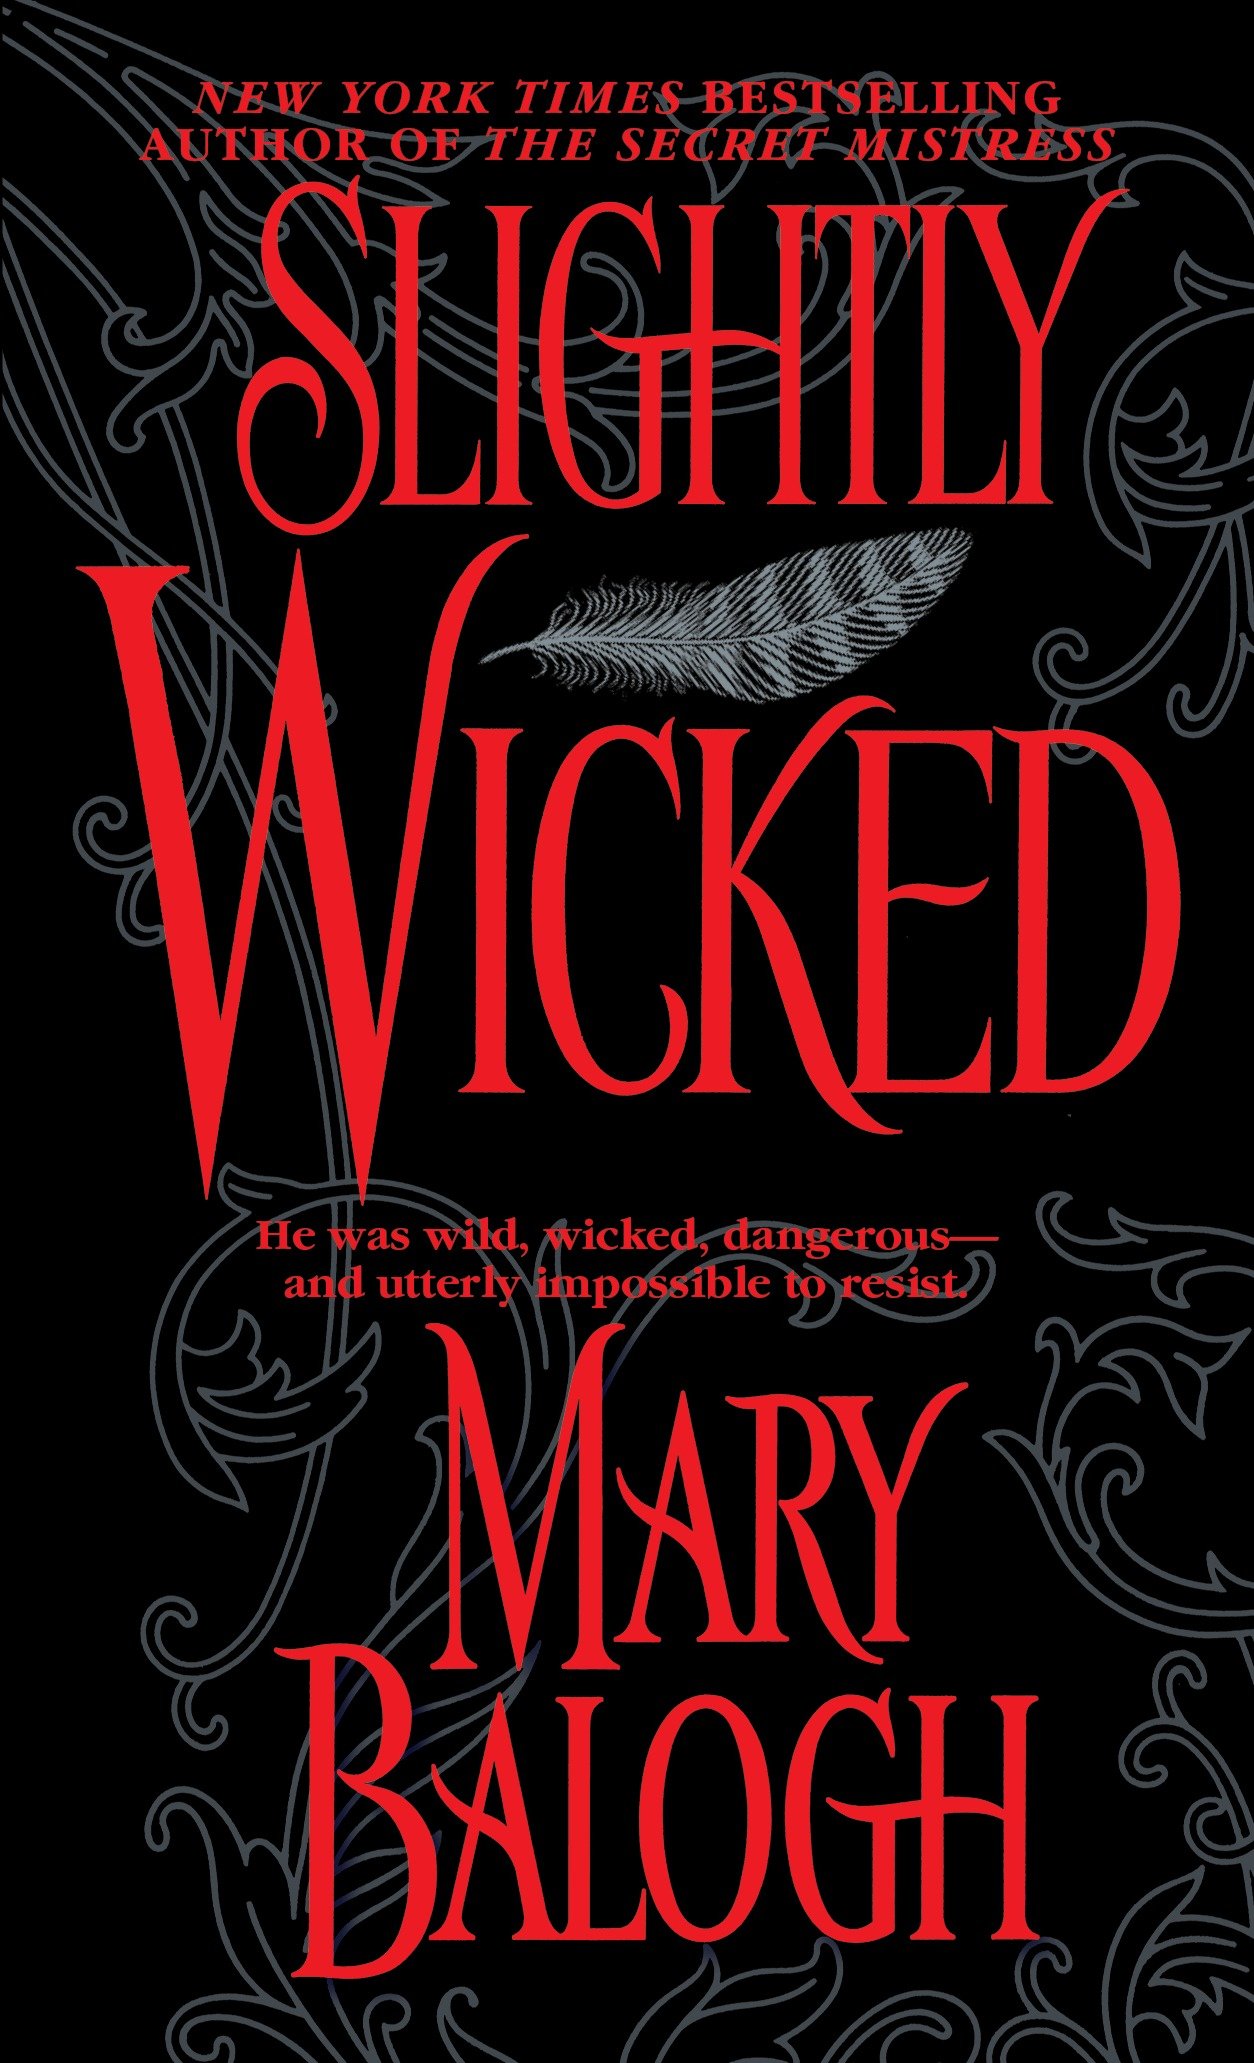 Slightly wicked cover image